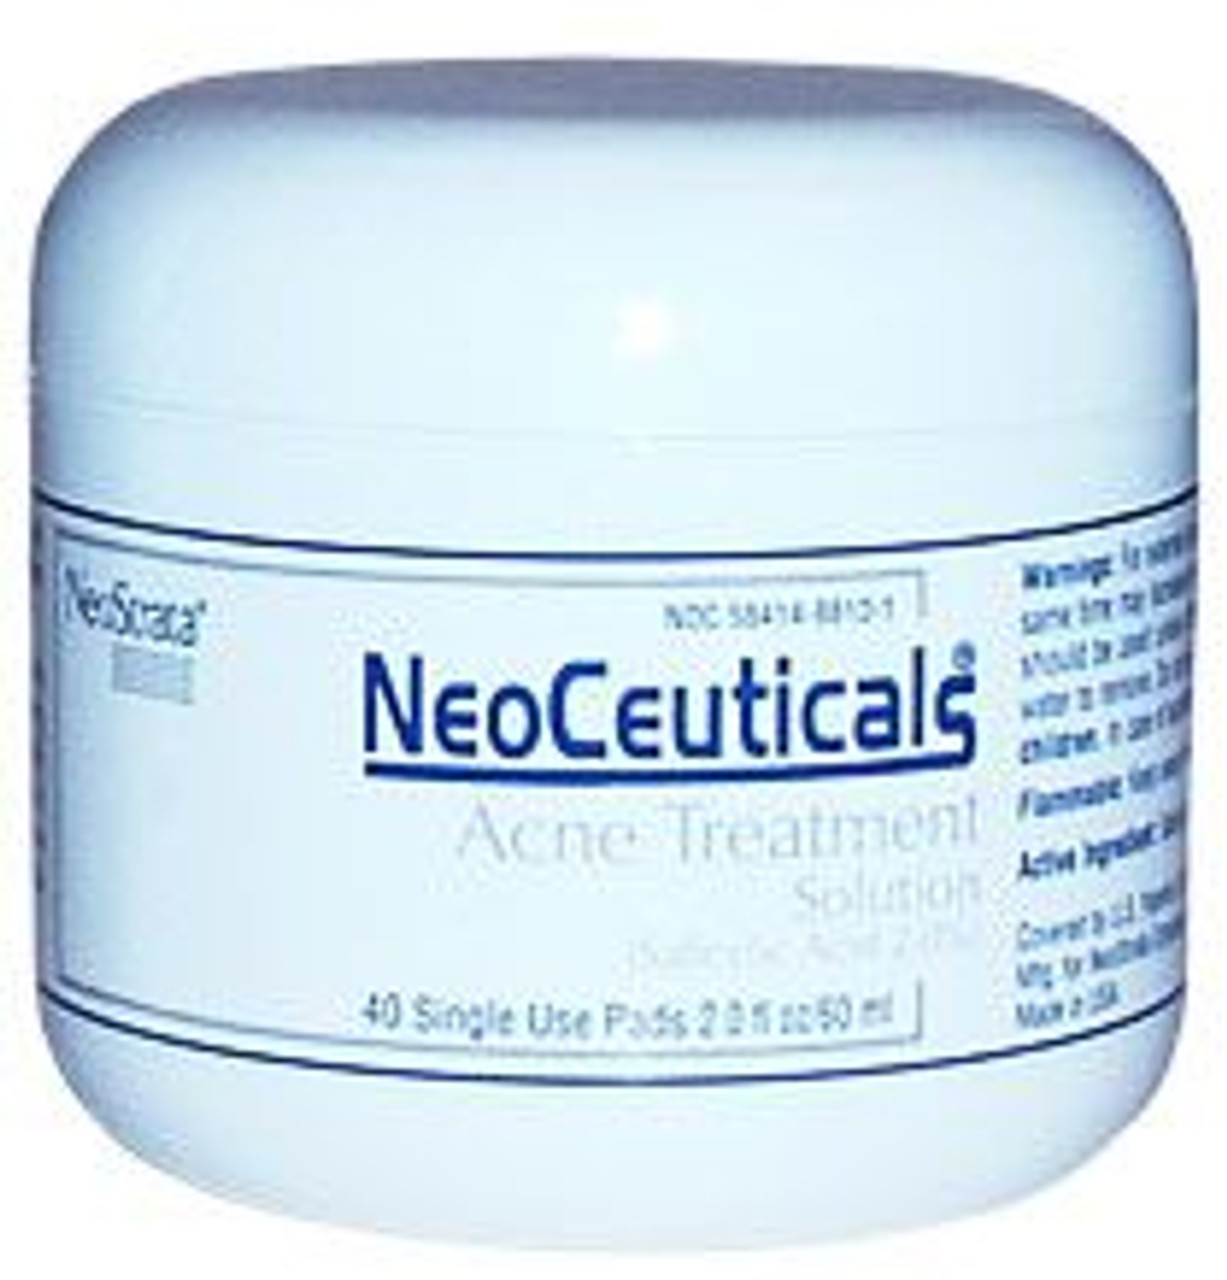 NeoStrata NeoCeuticals  Acne Treatment Solution Pads, 40 pads